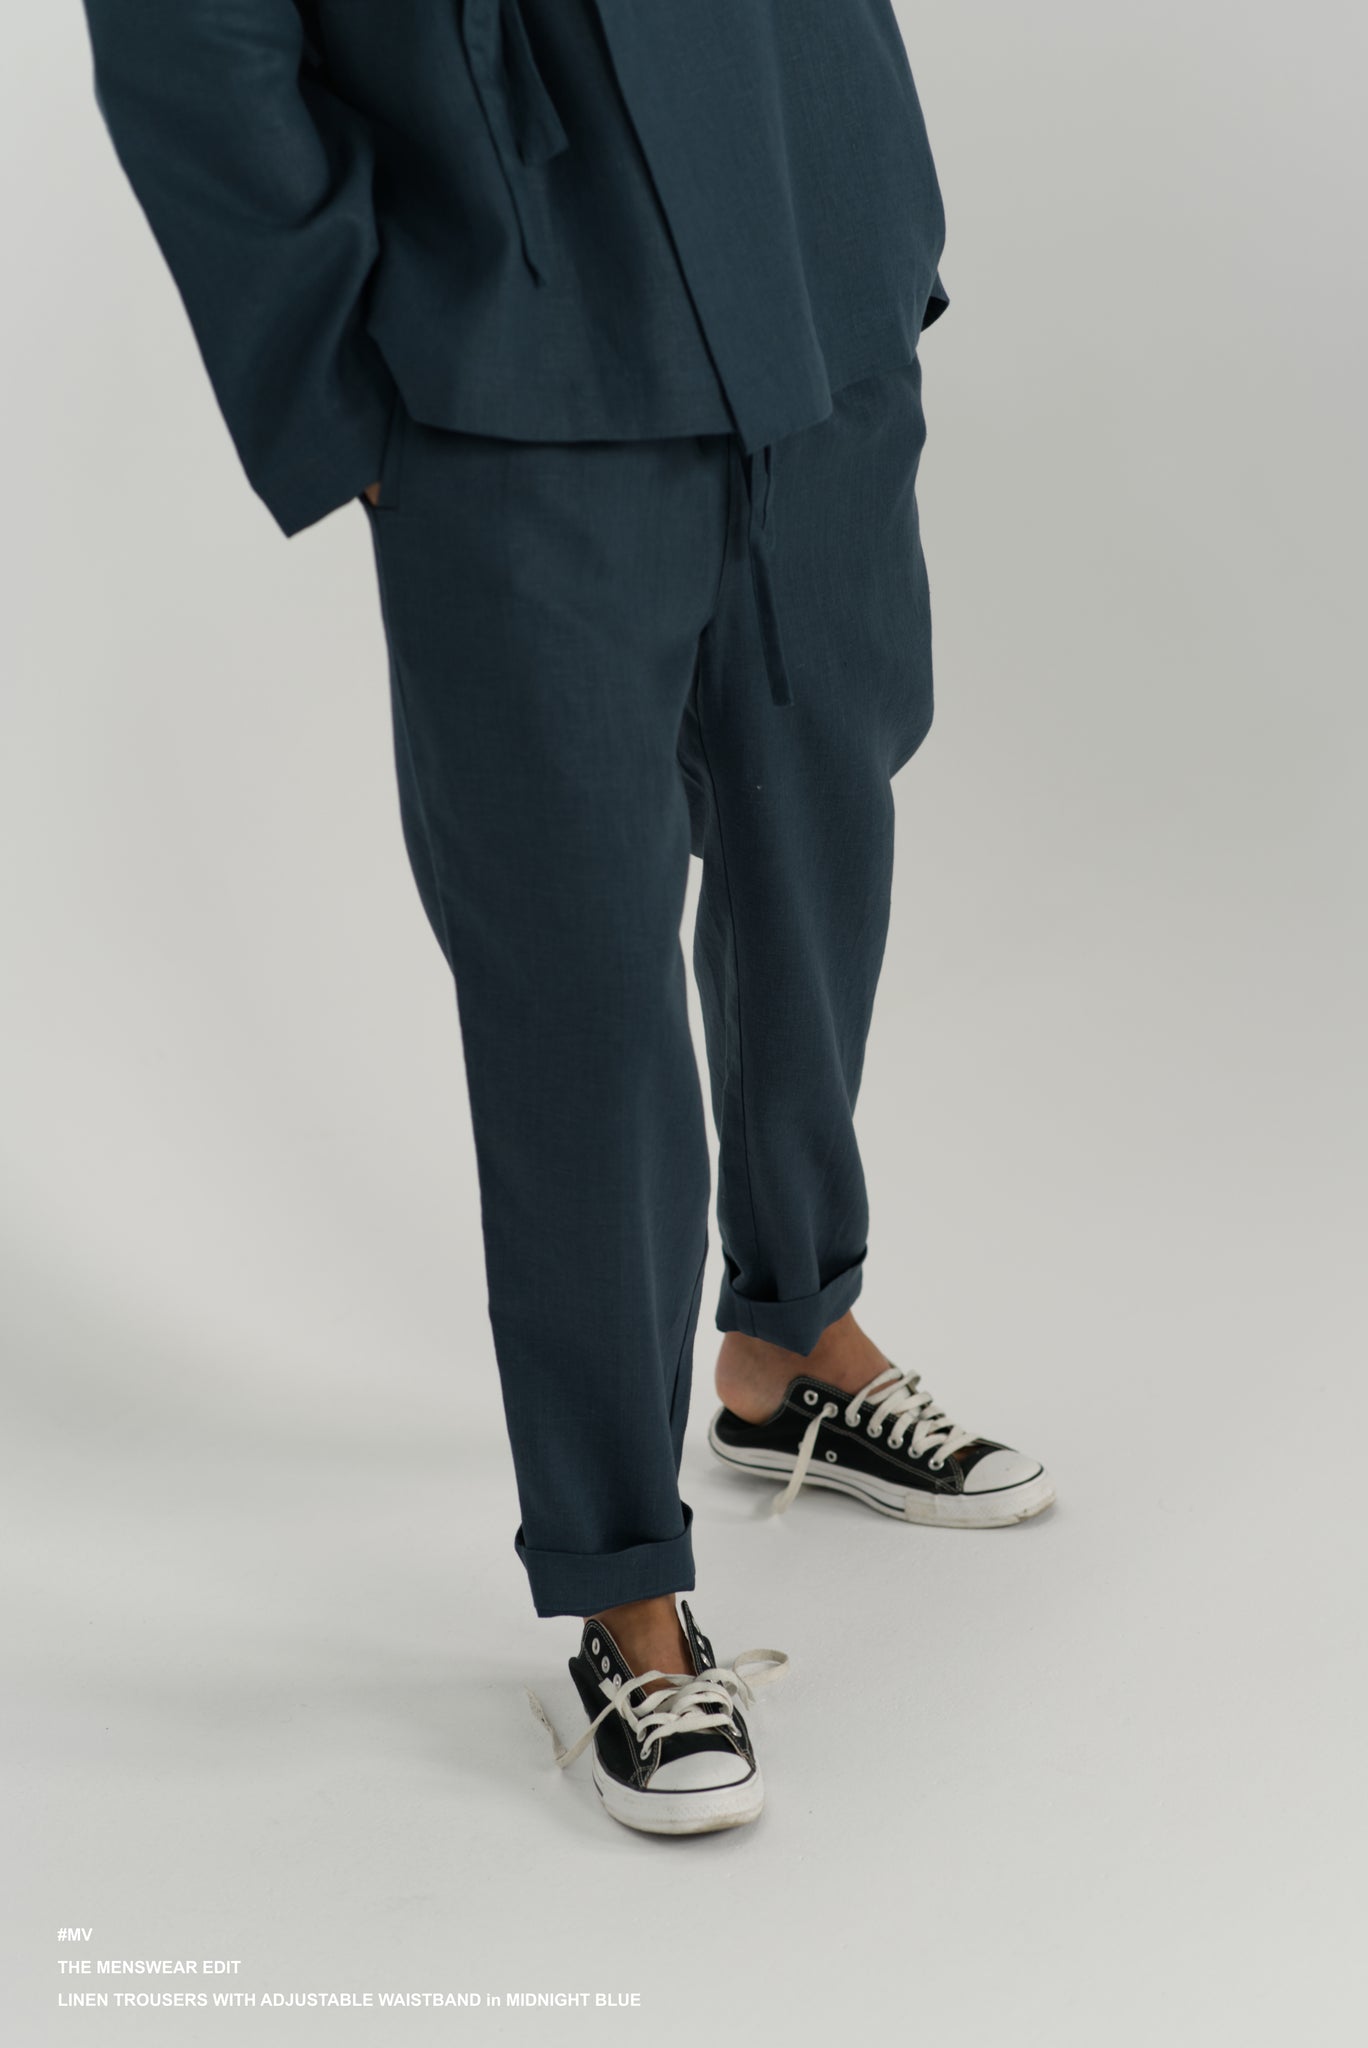 LINEN TROUSERS WITH ADJUSTABLE WAISTBAND in MIDNIGHT BLUE